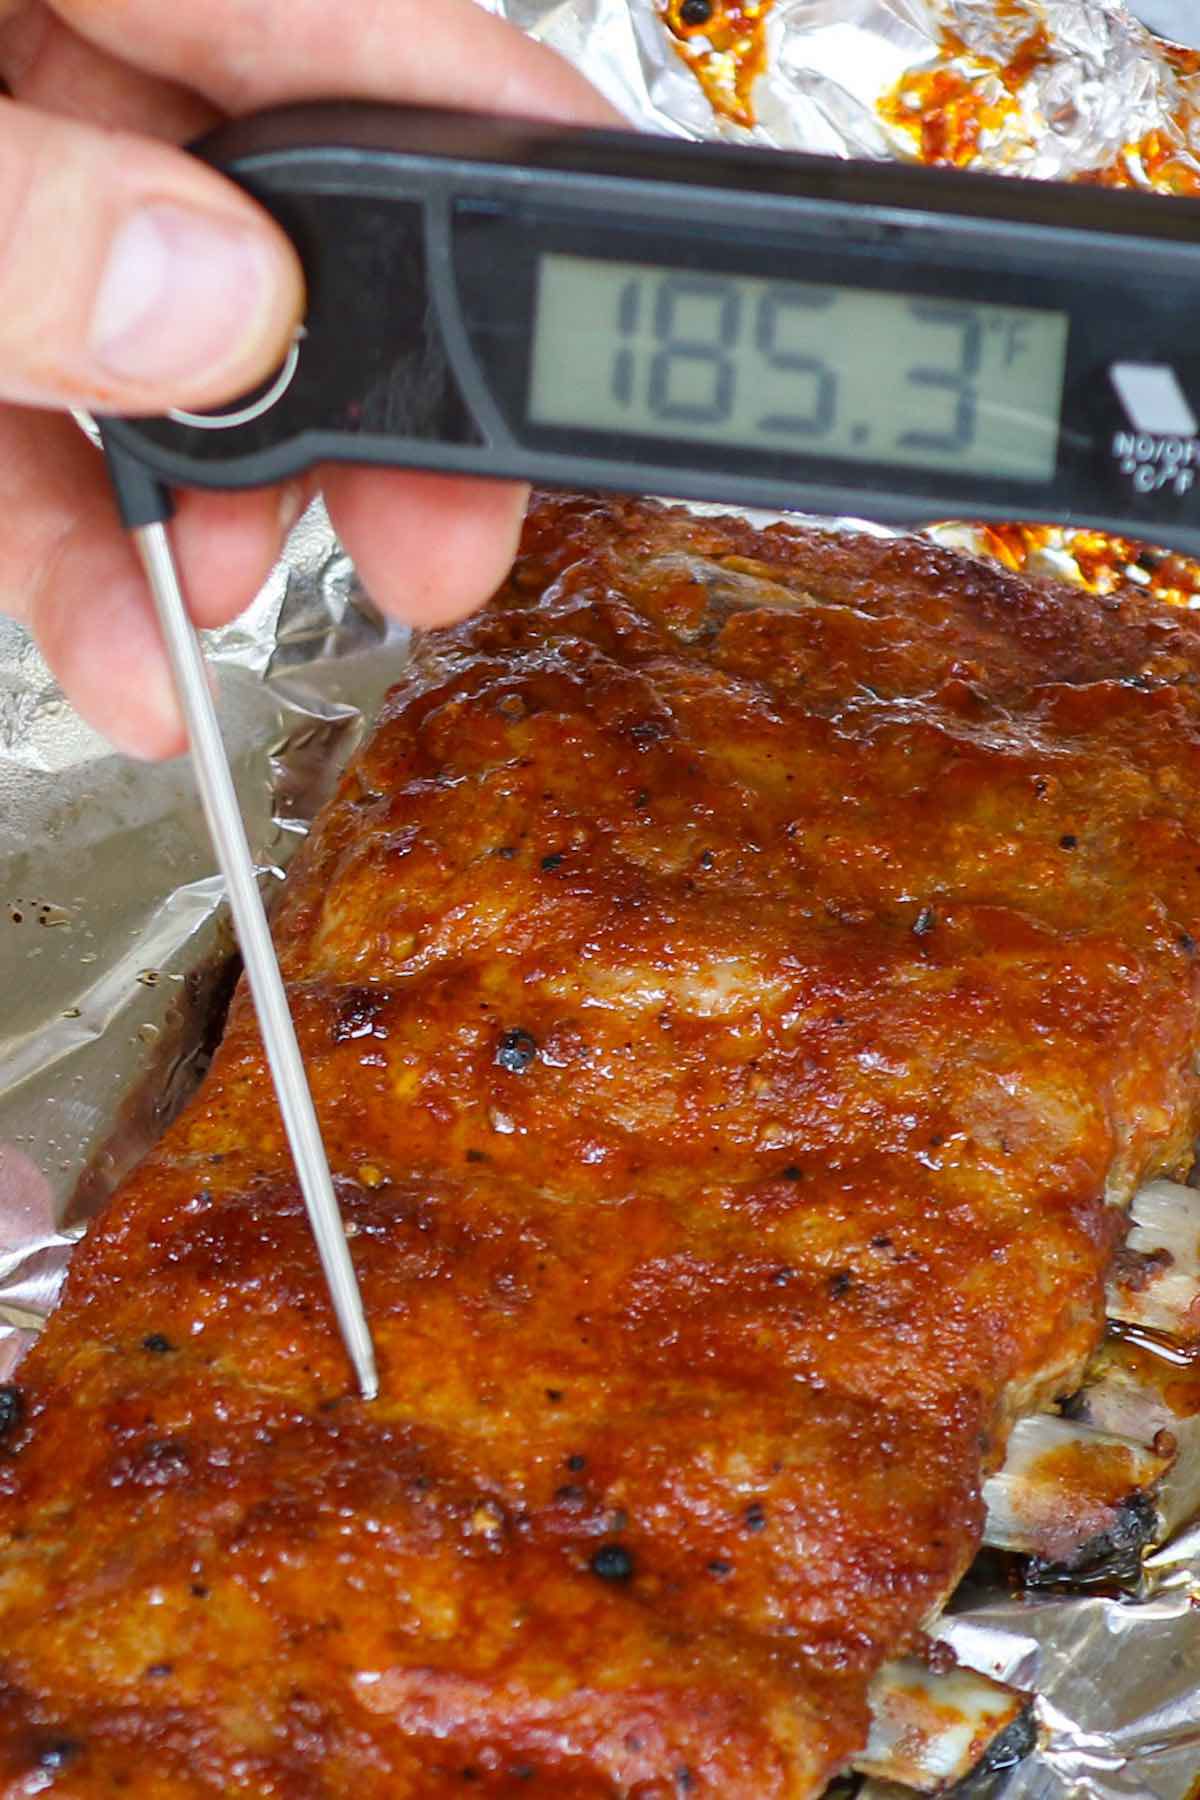 Check the internal temperature of the ribs and get a reading of 185°F indicating they are ready